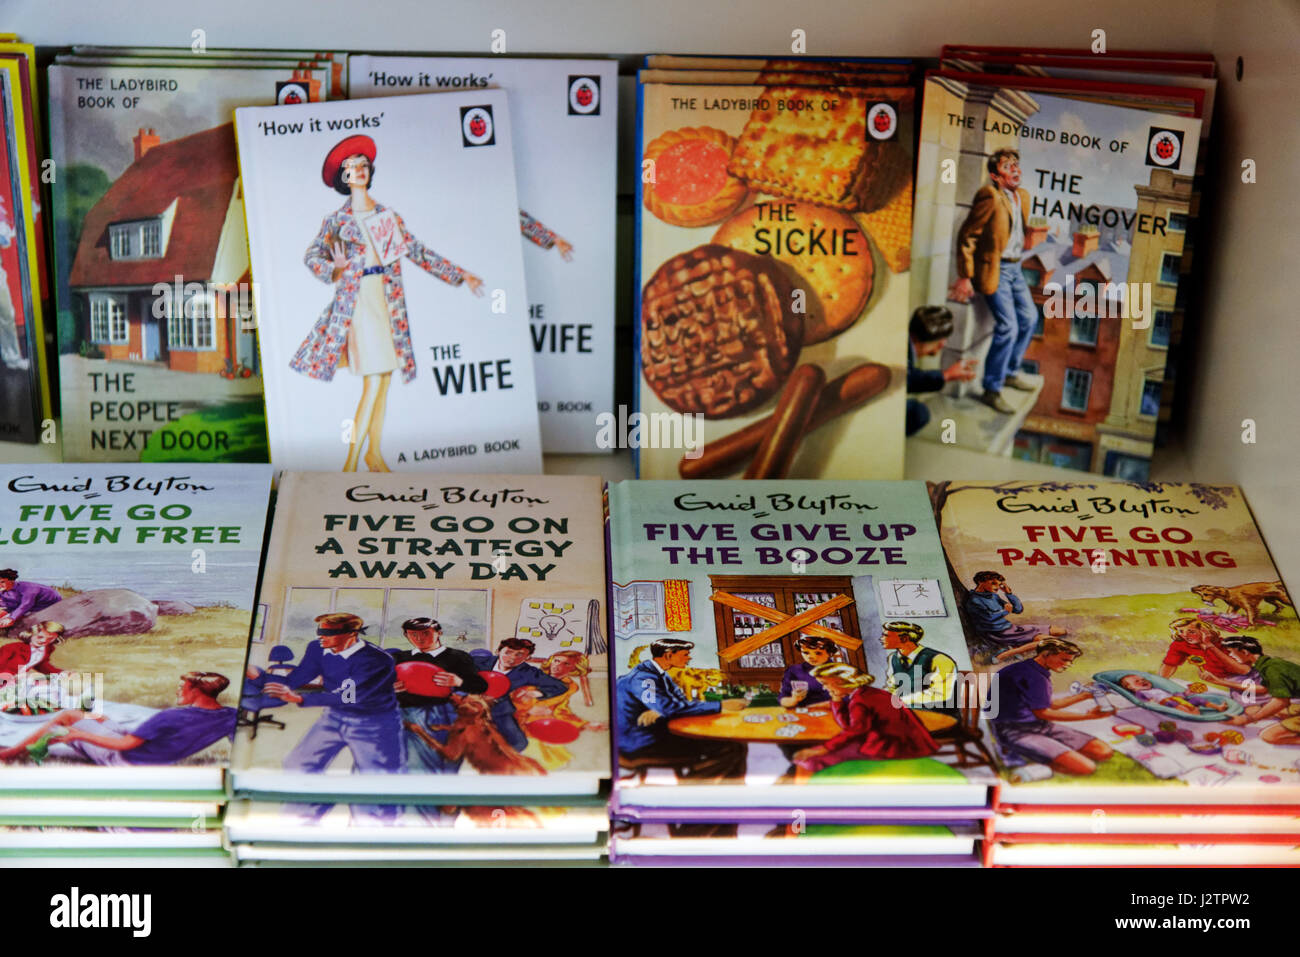 Spoof Famous Five and Ladybird Books titles, including Five Go Gluten Free and Five Go Parenting and the Ladybird book of The Hangover and The Sickie. Stock Photo